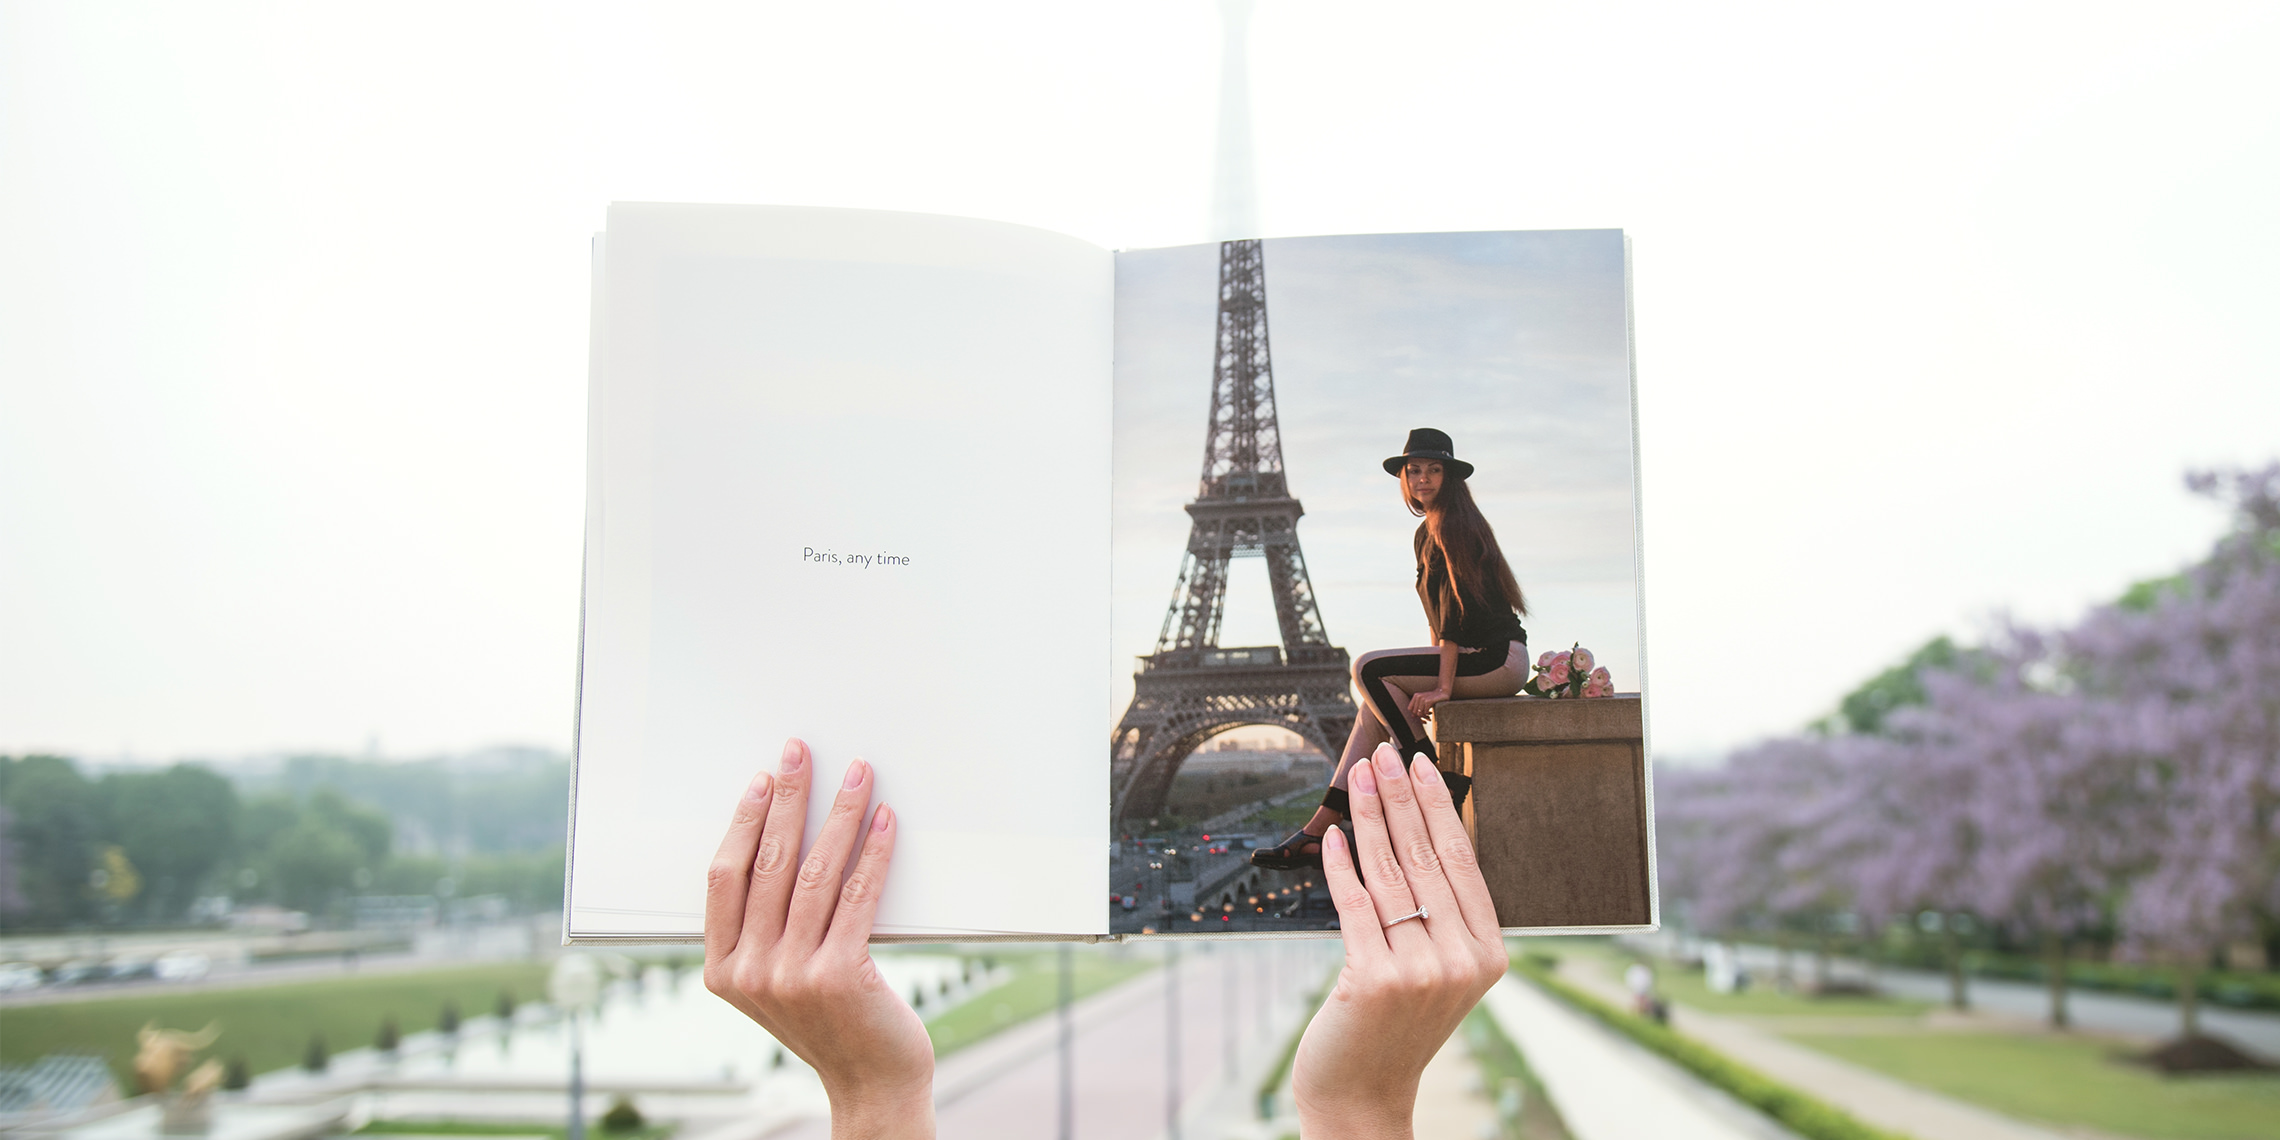 Hands holding portrait photo book in front of the Eiffel Tower.